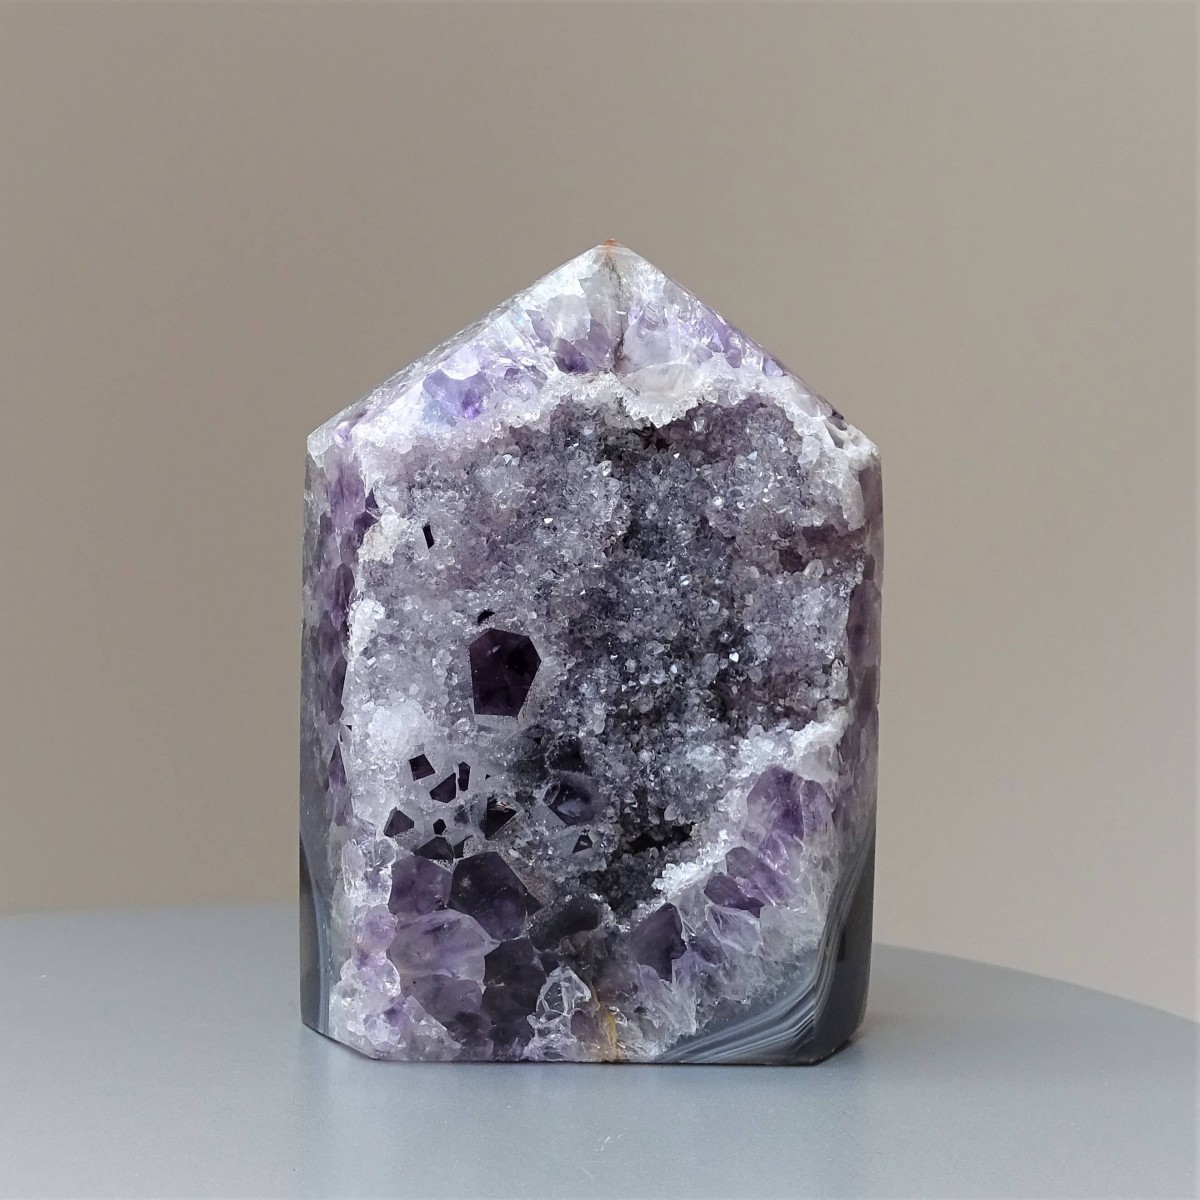 Amethyst with agate natural druse polished 553g, Brazil